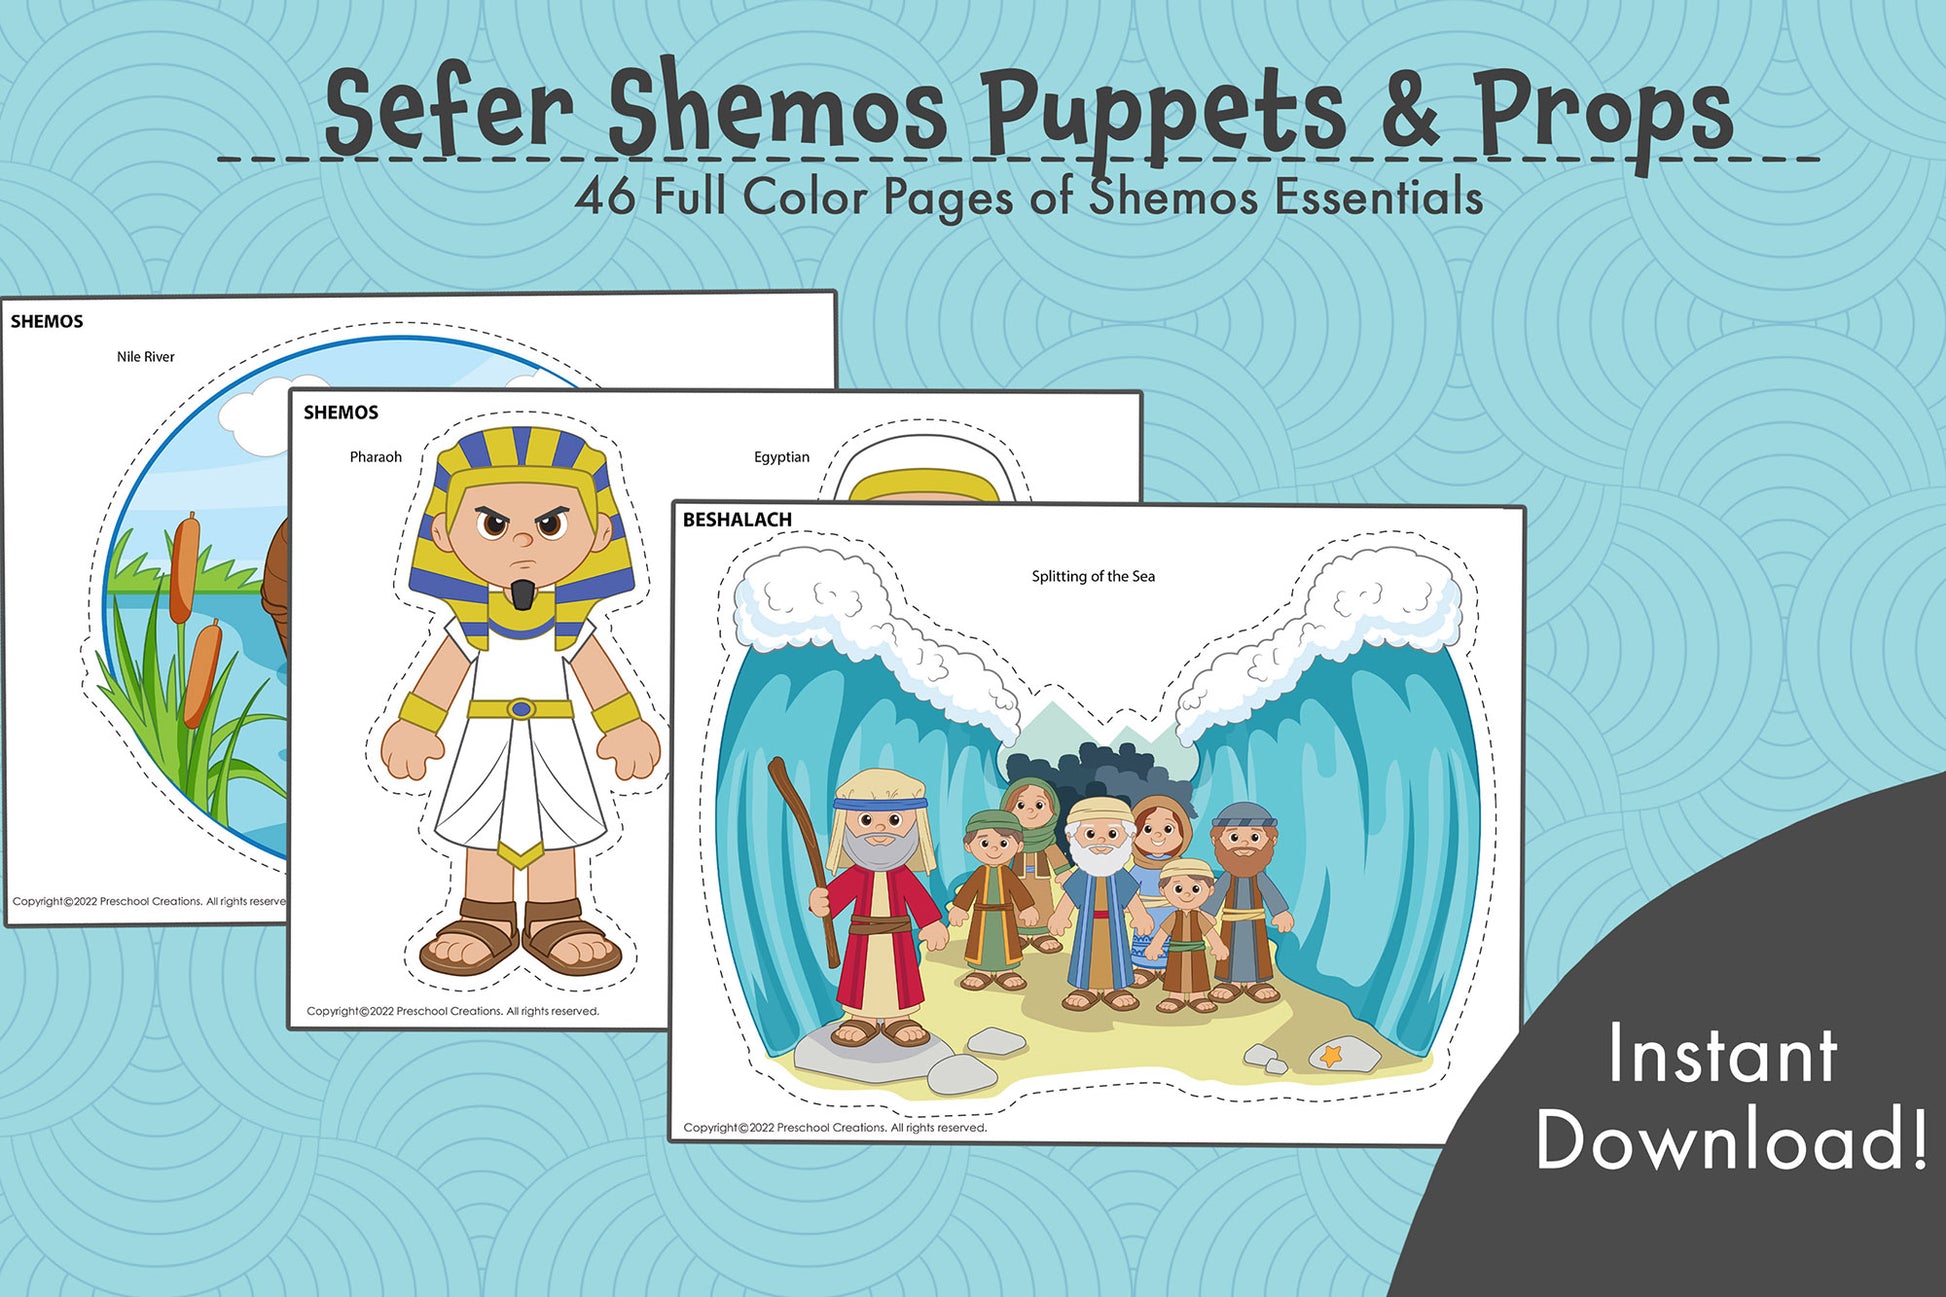 46 full color pages of adorable puppets and props for each Parsha in Sefer shemos. Pharaoh enslaving the Jewish people in Egypt, the 10 plagues, the mishkan - tabernacle and story of Passover. You'll bring the Parshah to life and increase student engagement in your preschool classroom with these whimsical resources.